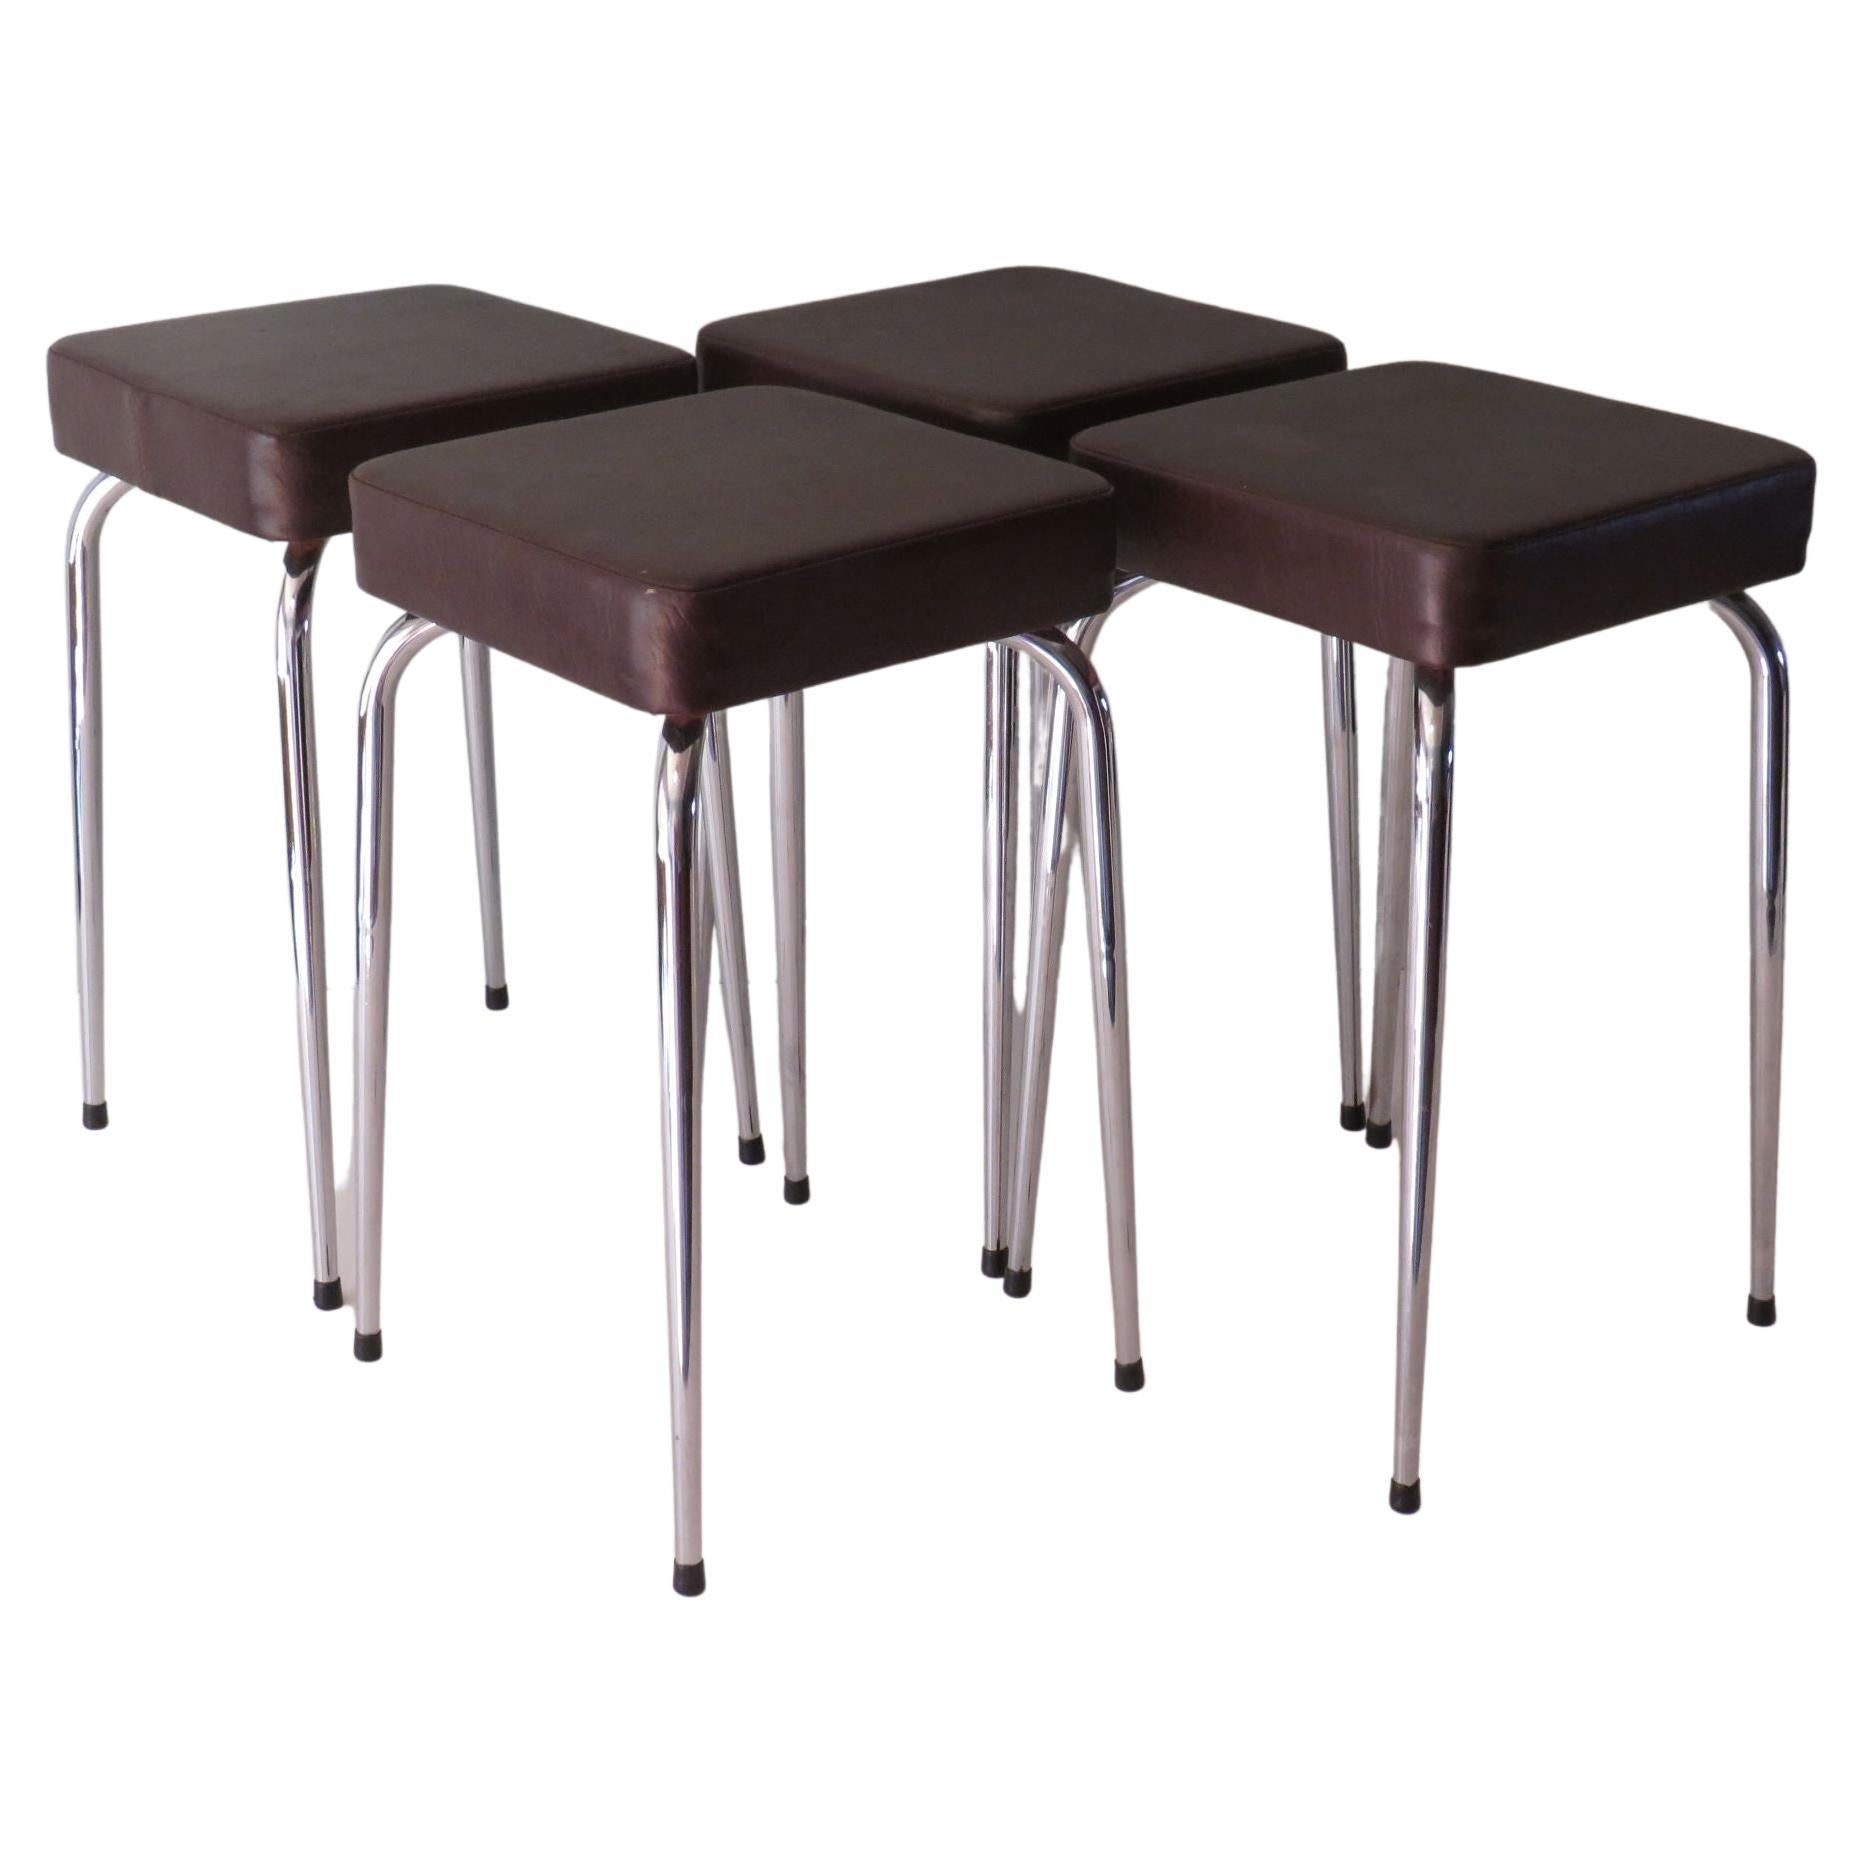 Set of 4 Stools, Chrome and Skai by Poelux, Belgium, 1960-1970 For Sale